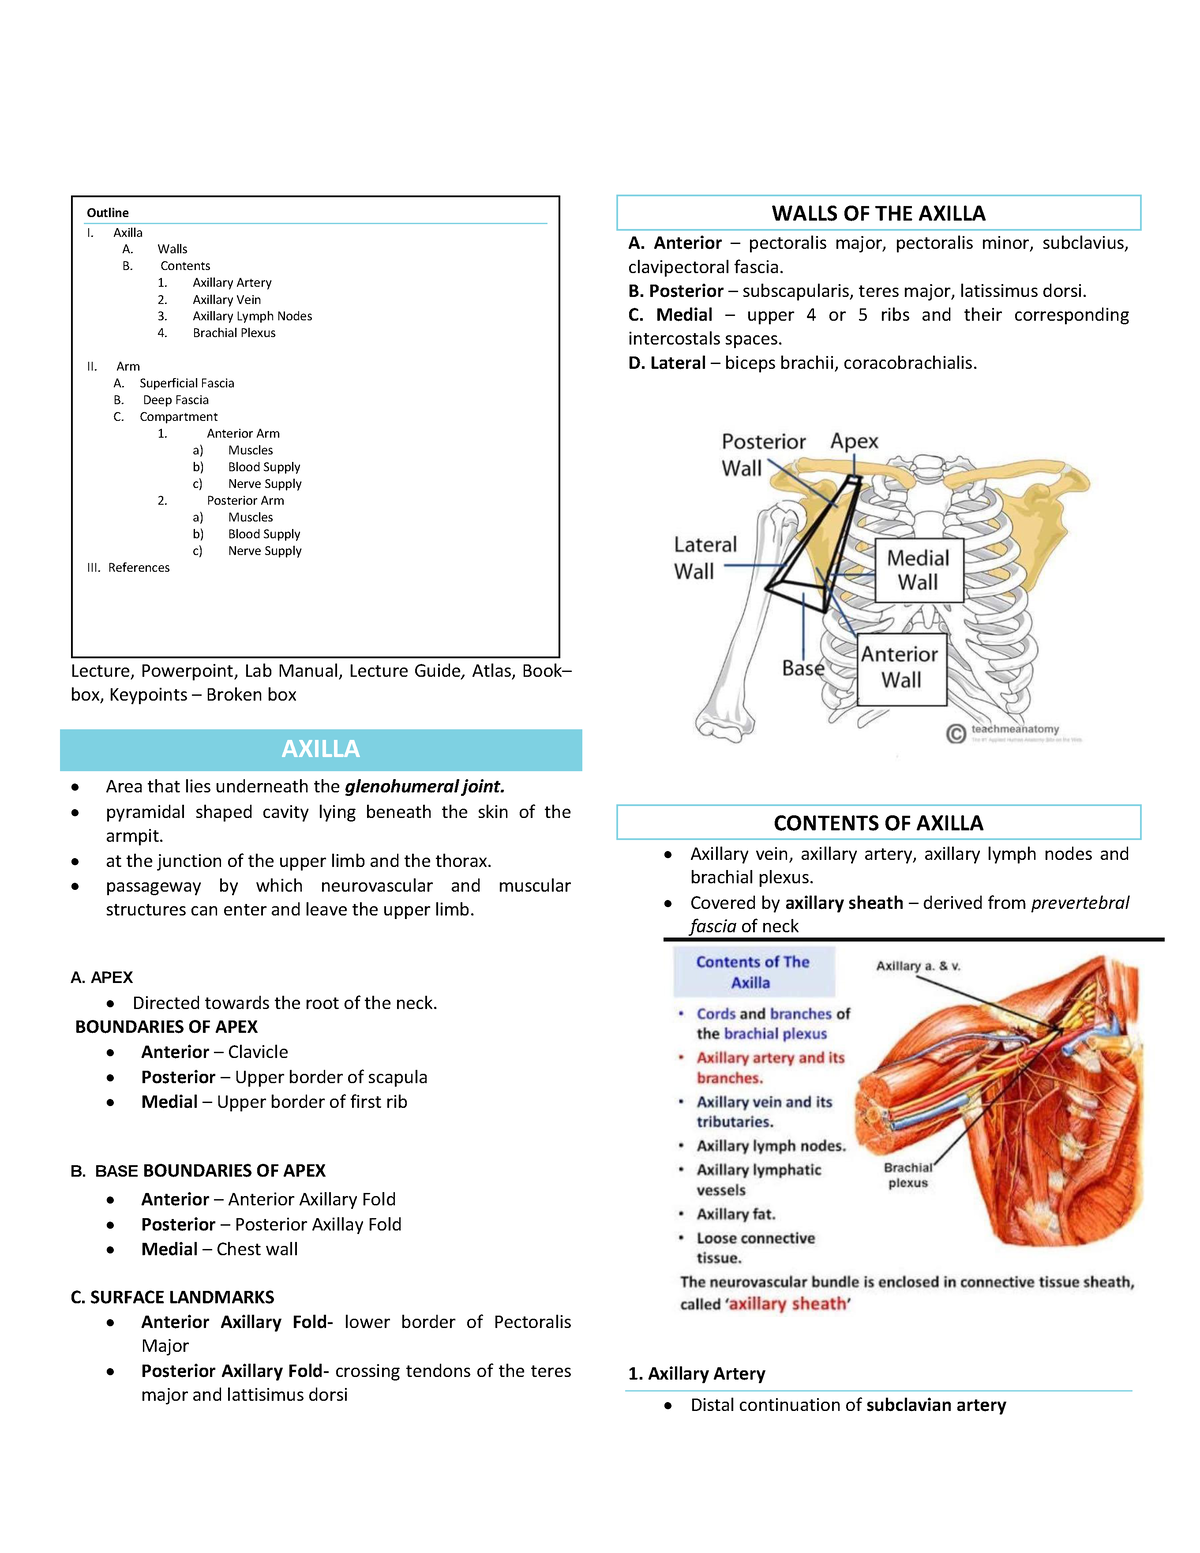 Axilla and Arm anatomy - Lecture notes 1-2 - Lecture, Powerpoint, Lab ...